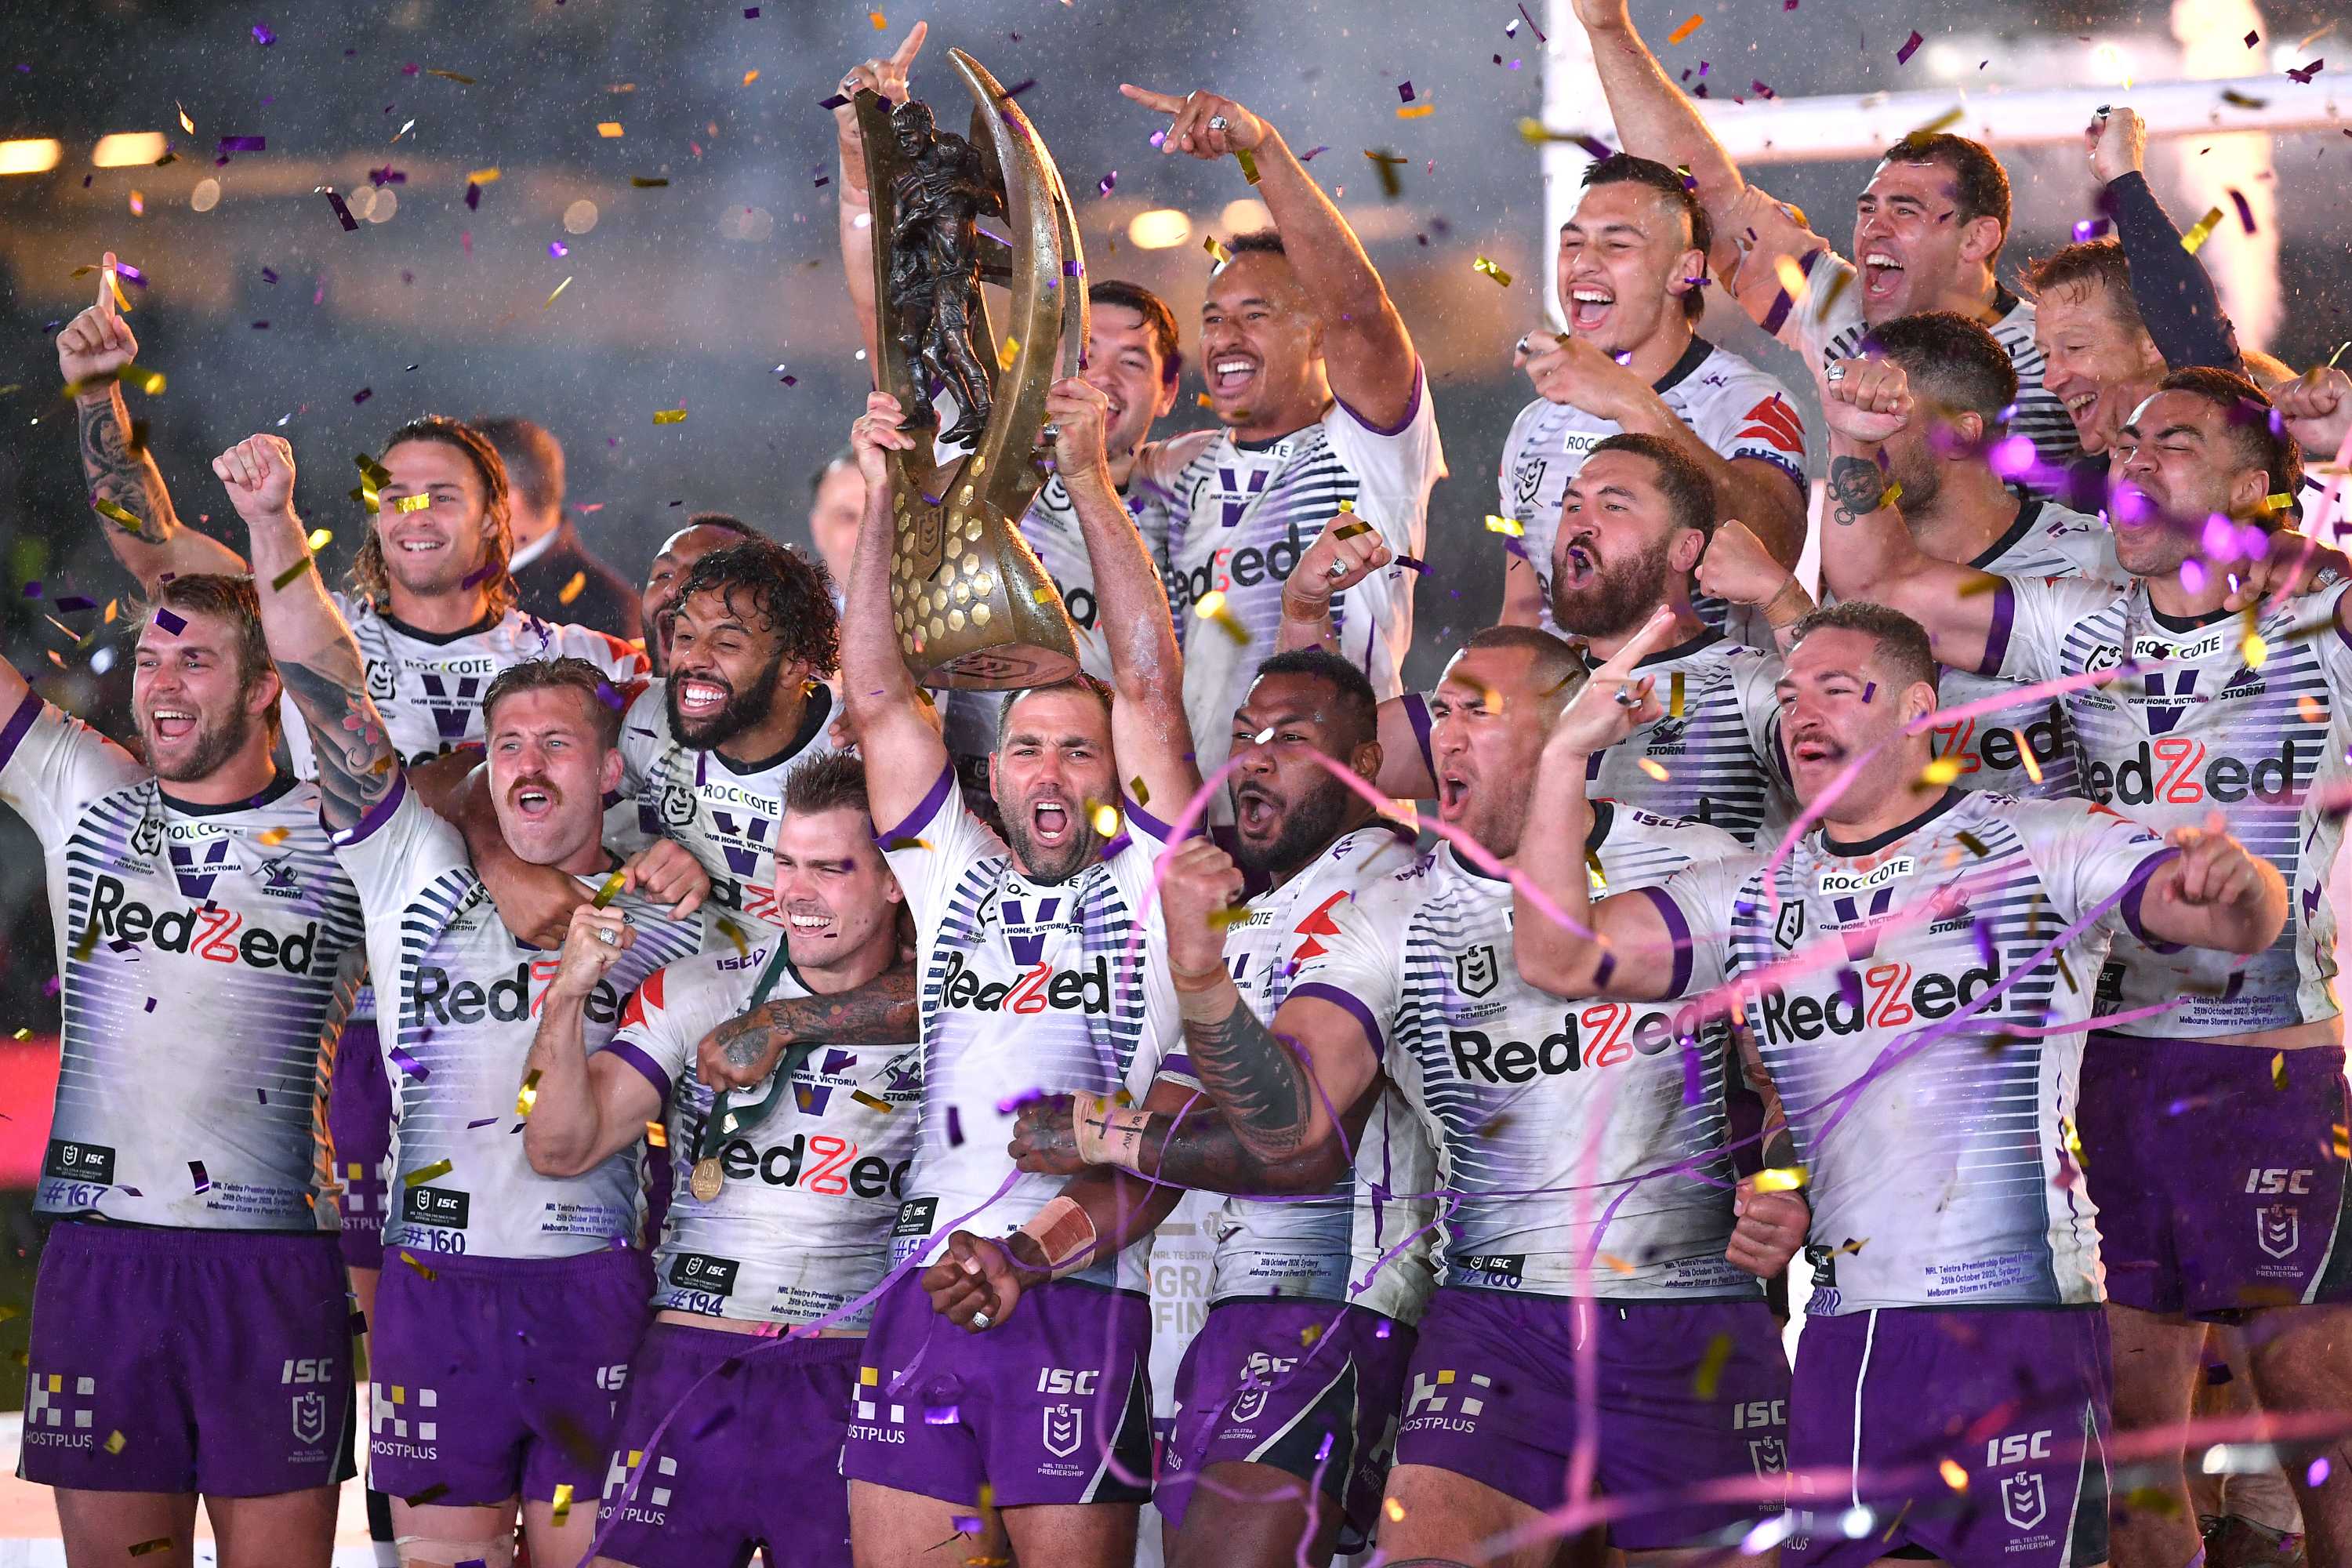 Melbourne Storm beat dogged Penrith Panthers 26-20 in dramatic NRL grand final